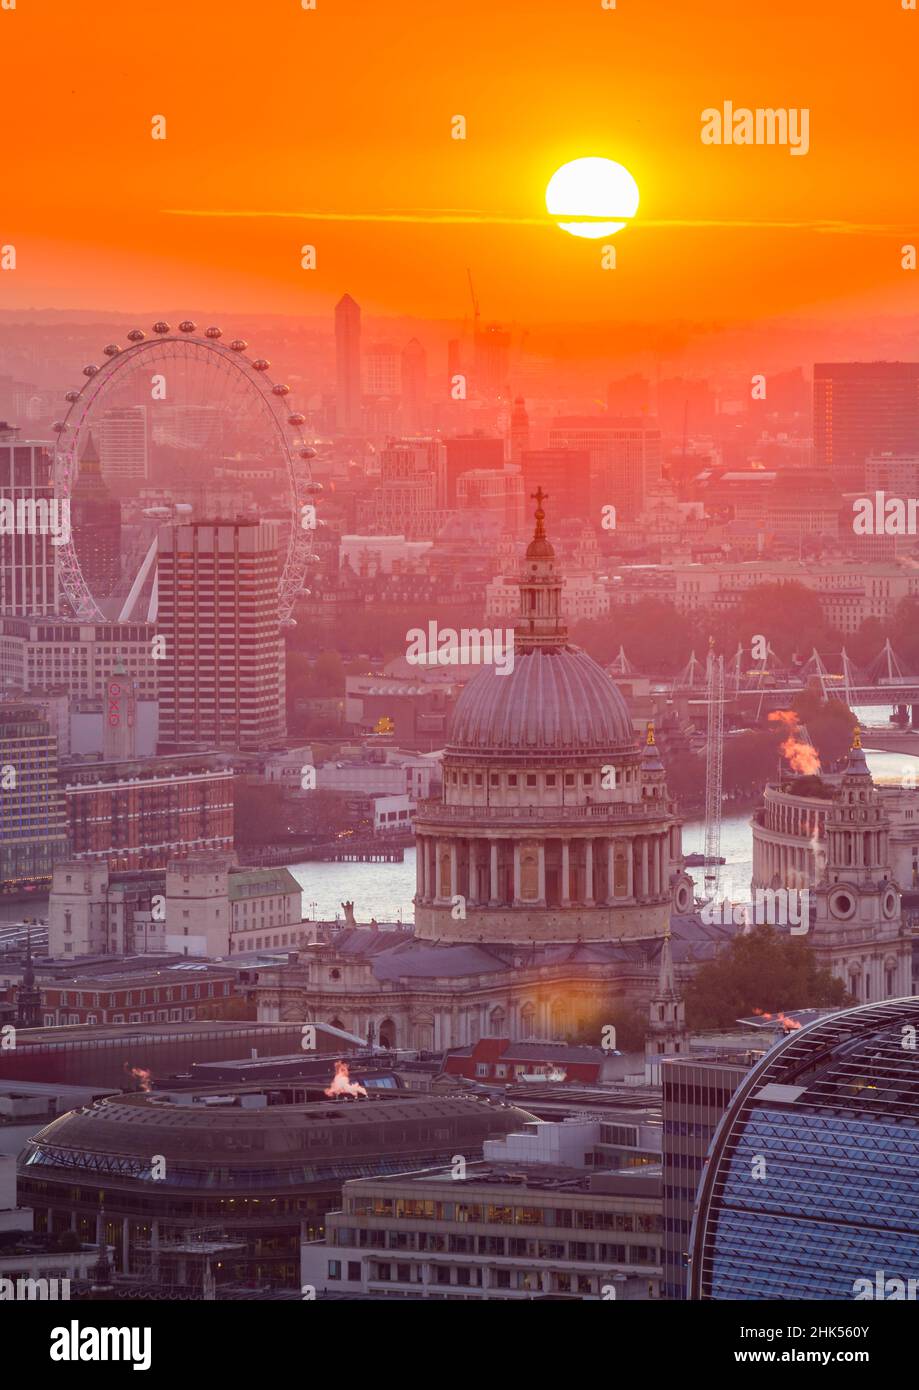 View of sun setting over London Eye and St. Paul's Cathedral from the Principal Tower, London, England, United Kingdom, Europe Stock Photo